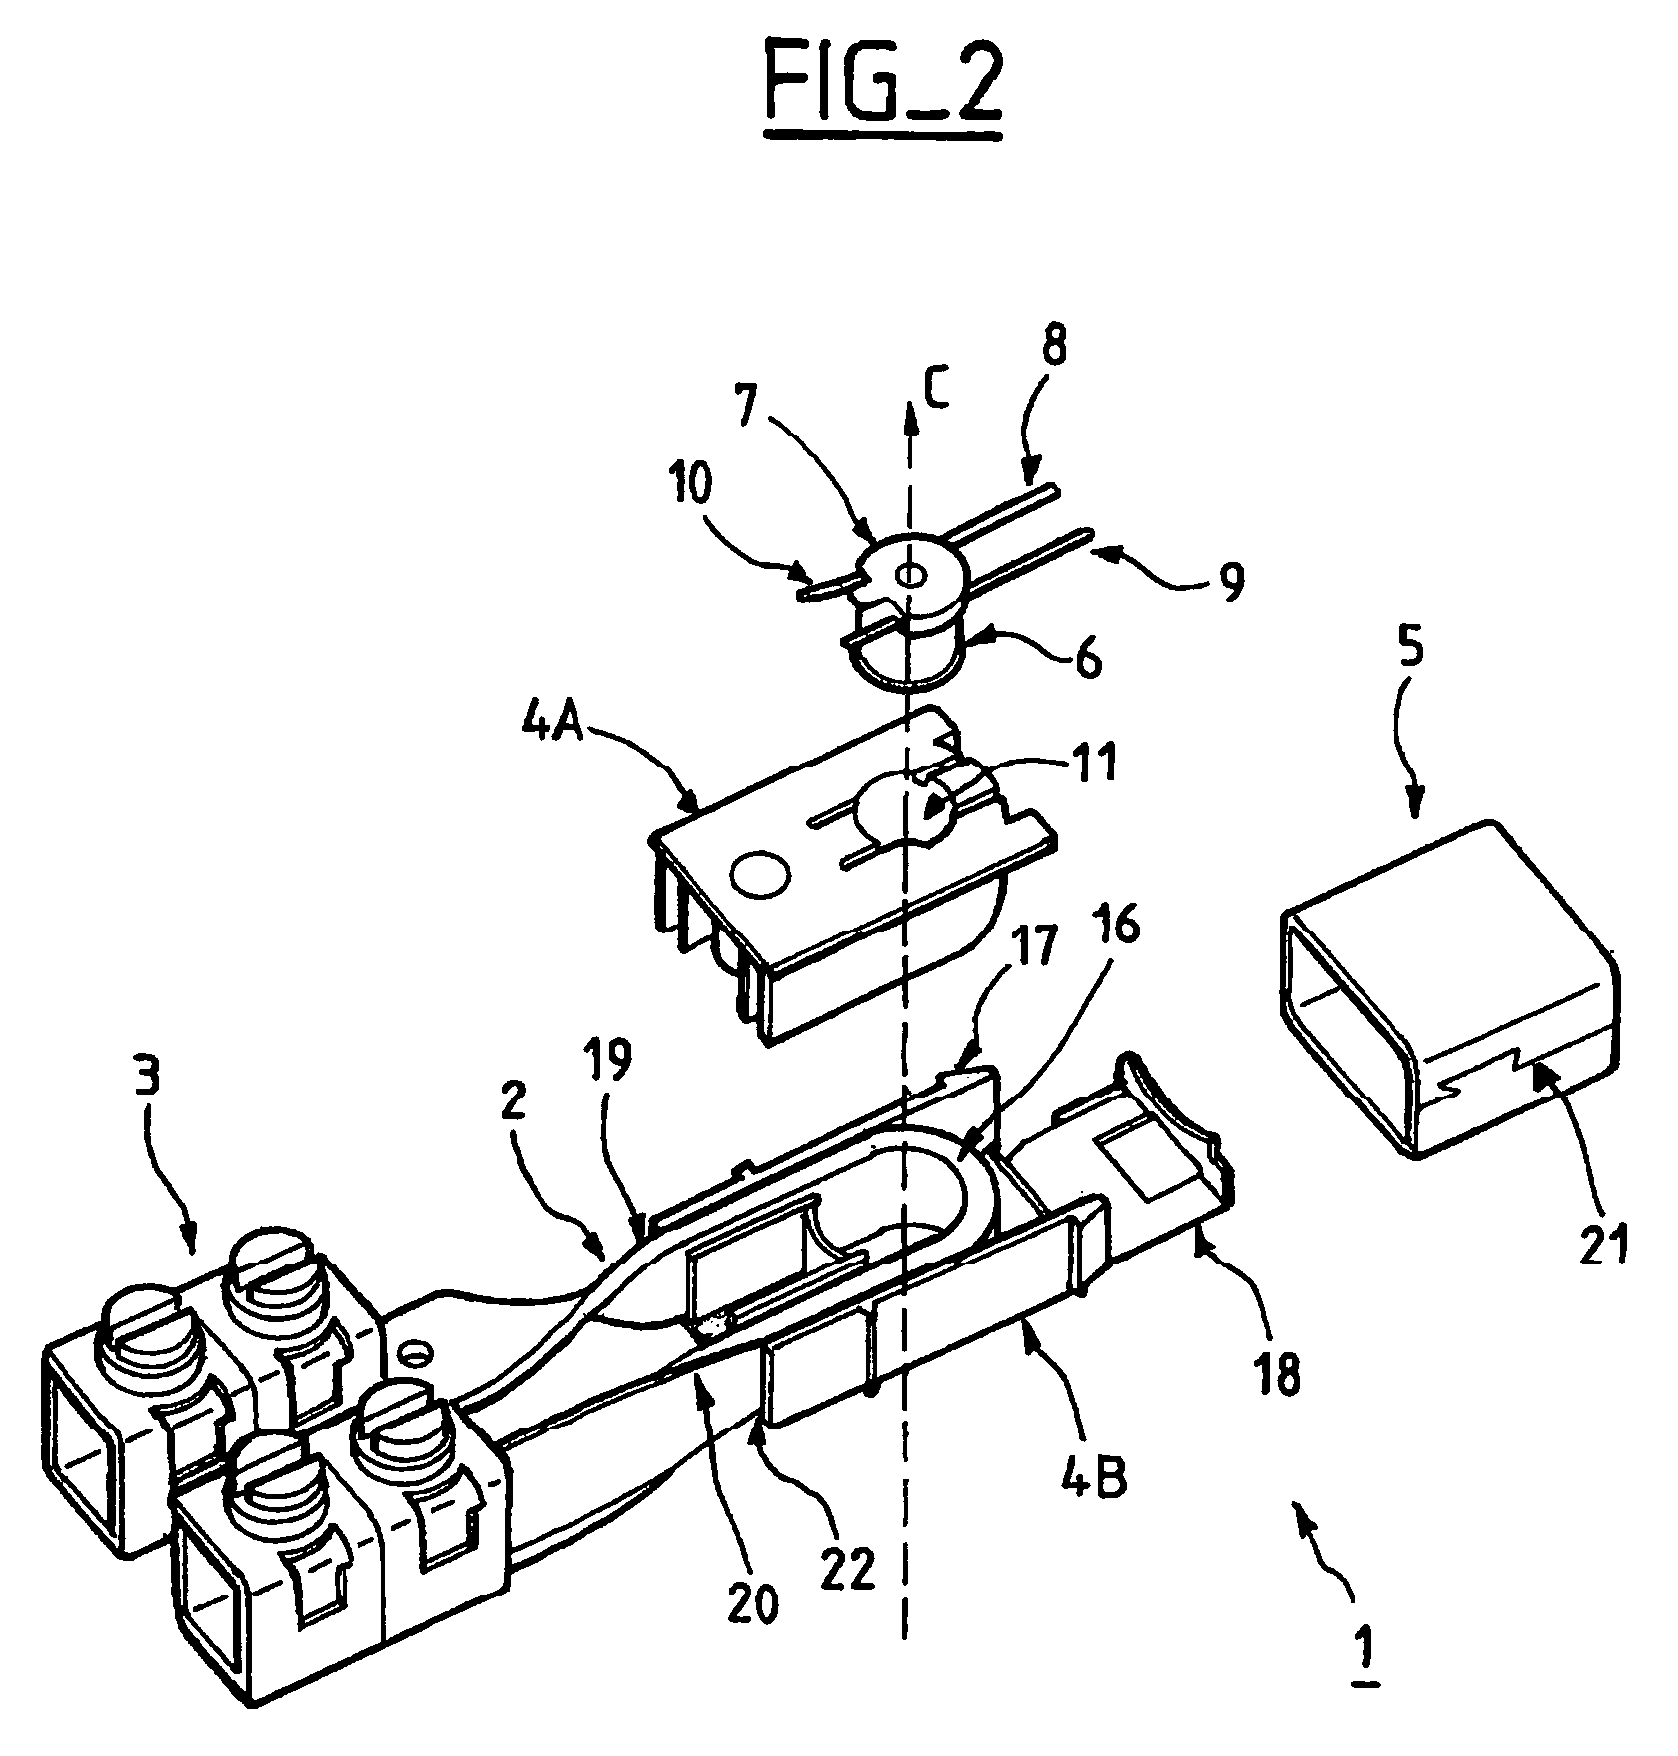 Device for measuring an electric current